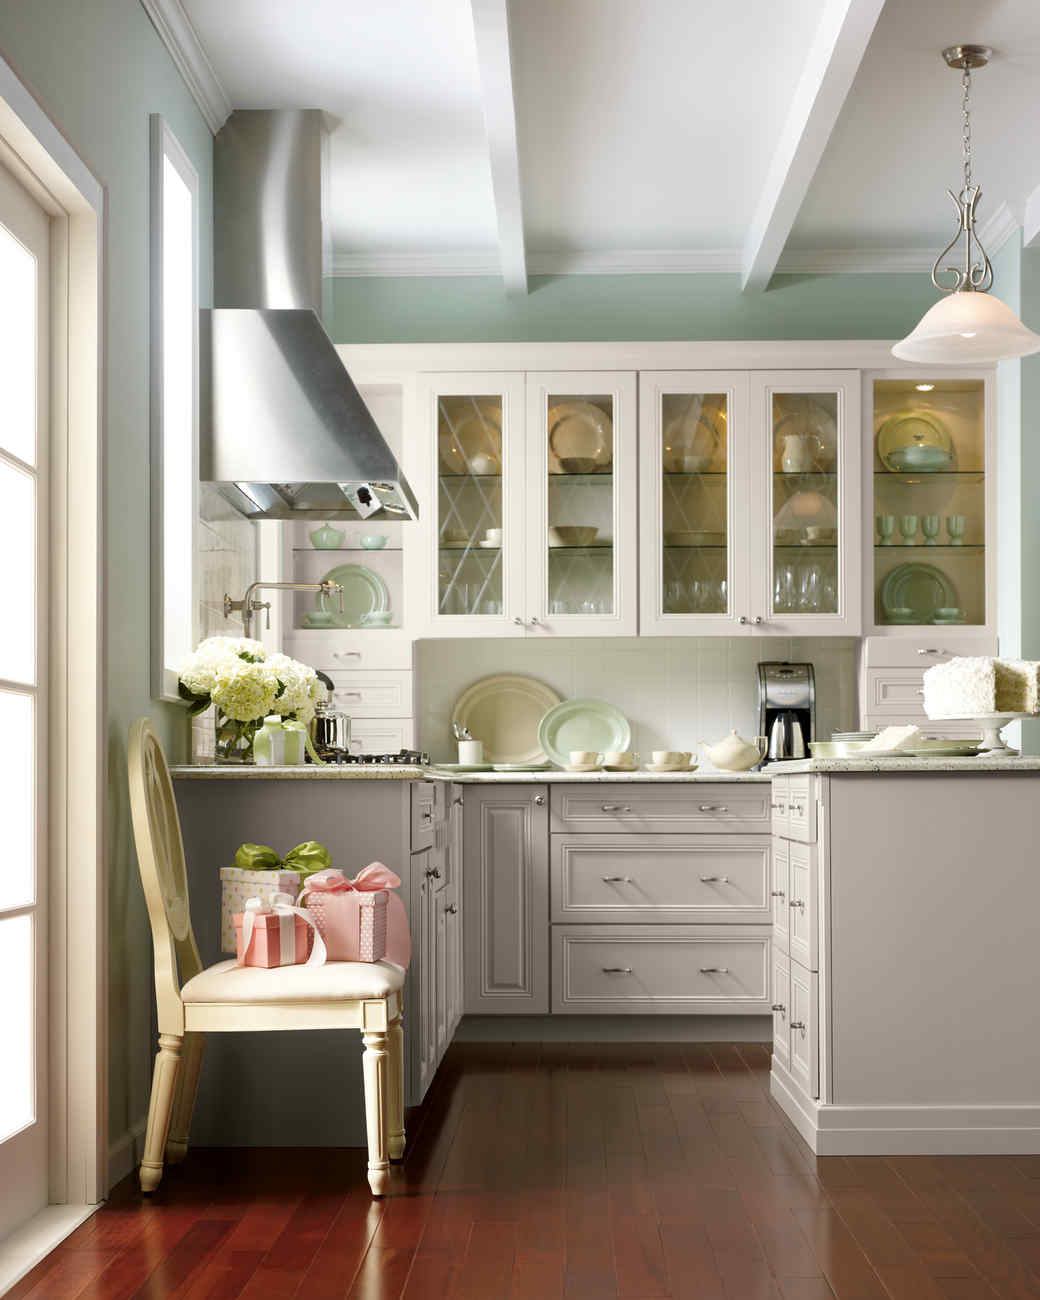 Creatice Martha Stewart Kitchen Cabinets for Small Space